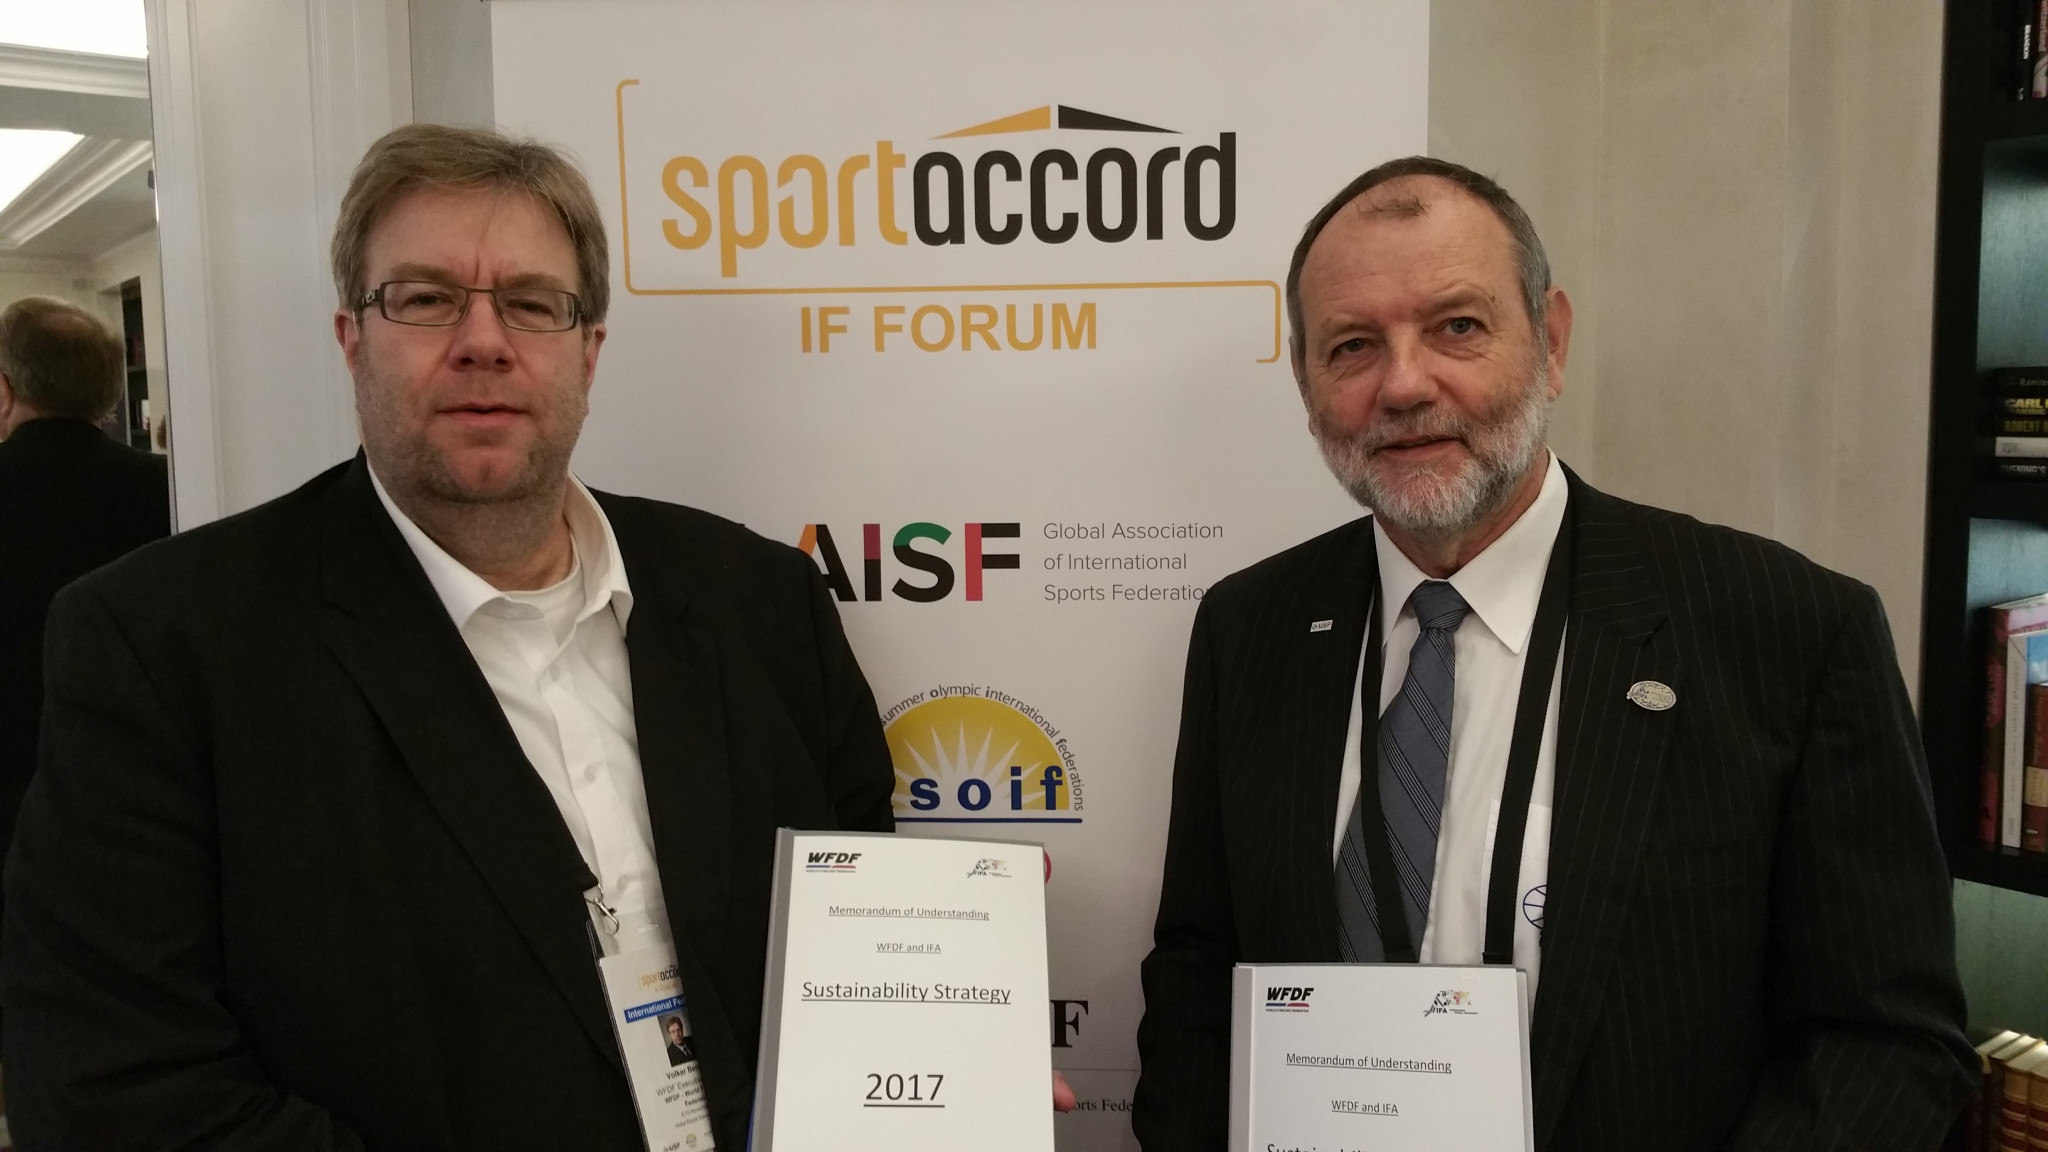 The MoU was signed between WFDF executive director Volker Bernardi, left, and IFA President Karl Weiss ©IFA/WFDF